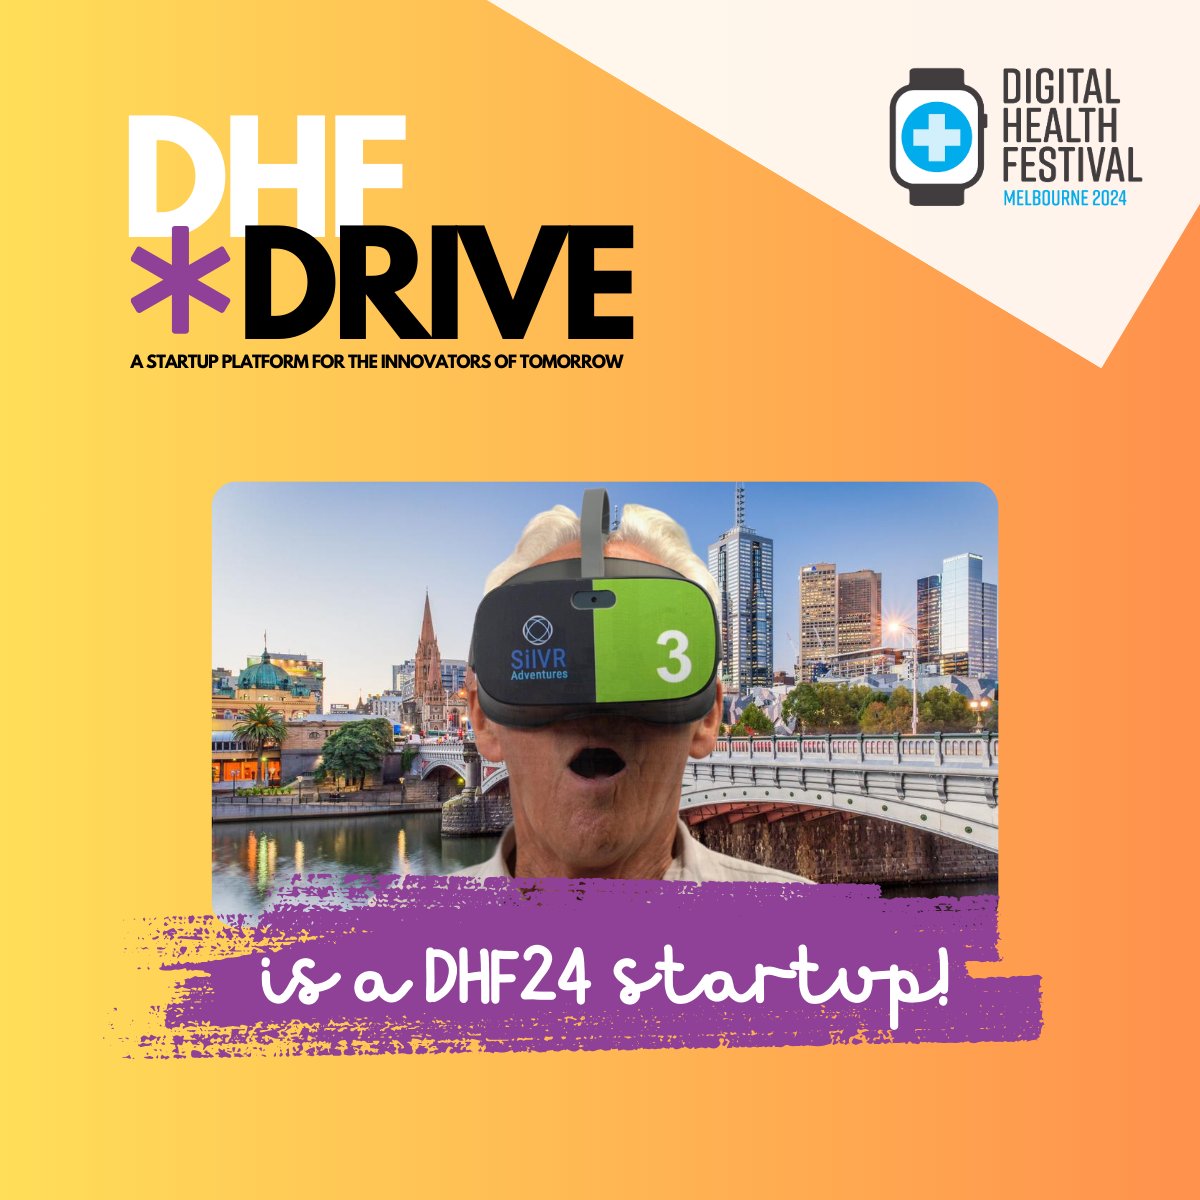 SilVR Adventures is delighted to be one of 150 start-ups that will exhibit at #DHF24 😎 We're excited for the event on 7-8 May in our home state of Victoria (where last year we were crowned Start-up of the Year 👑😉). We look forward to seeing you there next month!💙